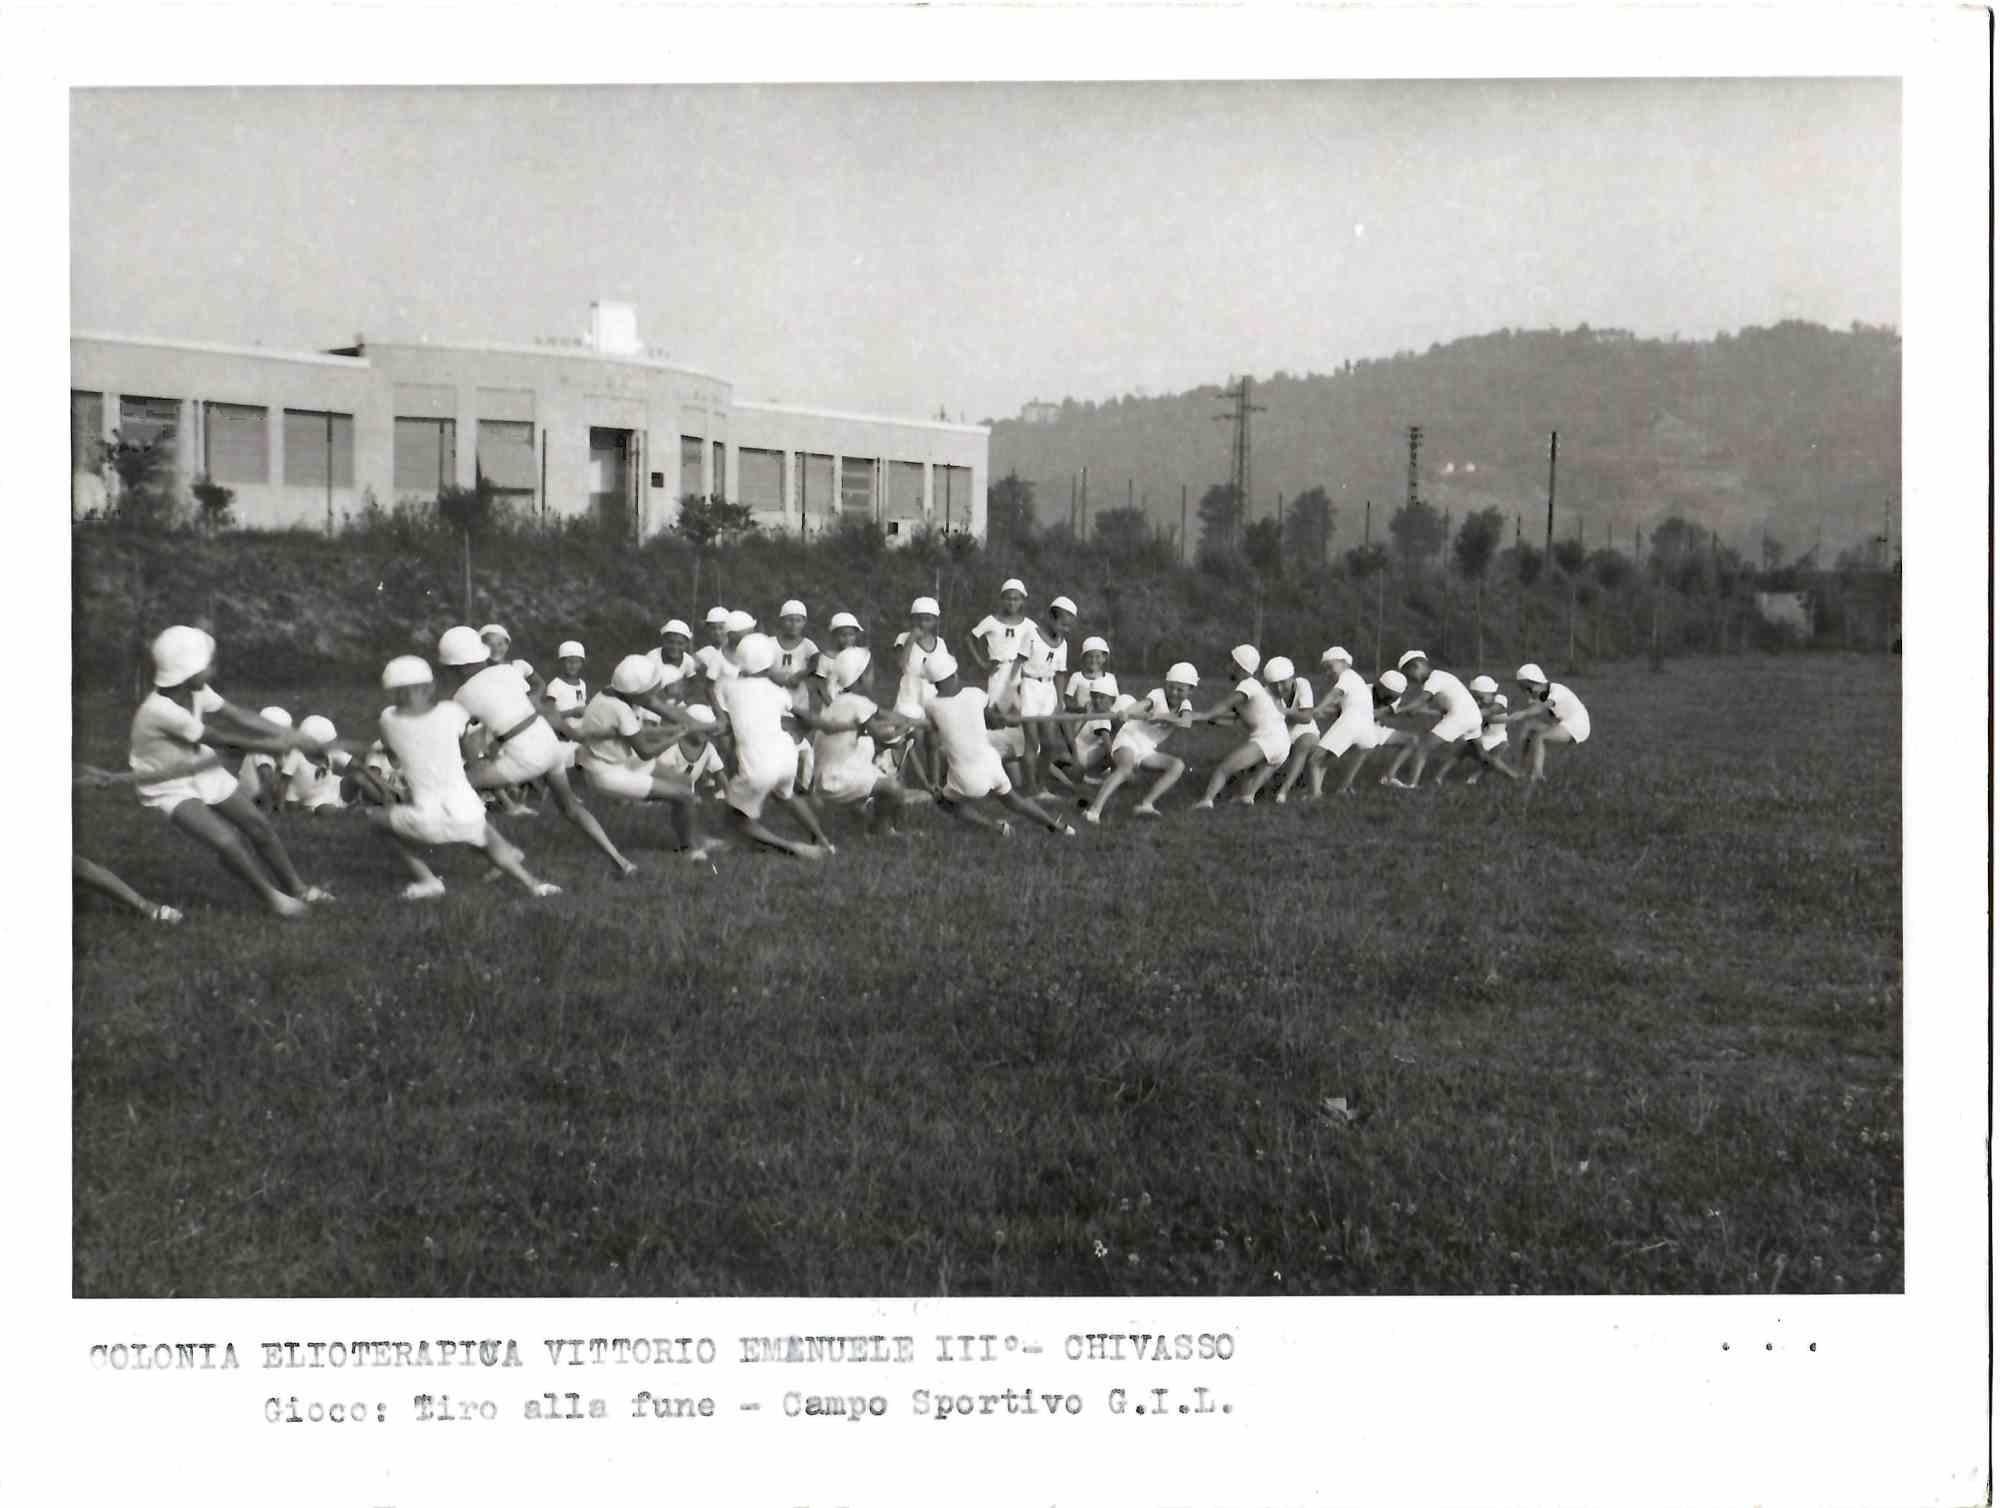 Unknown Black and White Photograph - Tug of War - Vintage B/W photo - 1930s